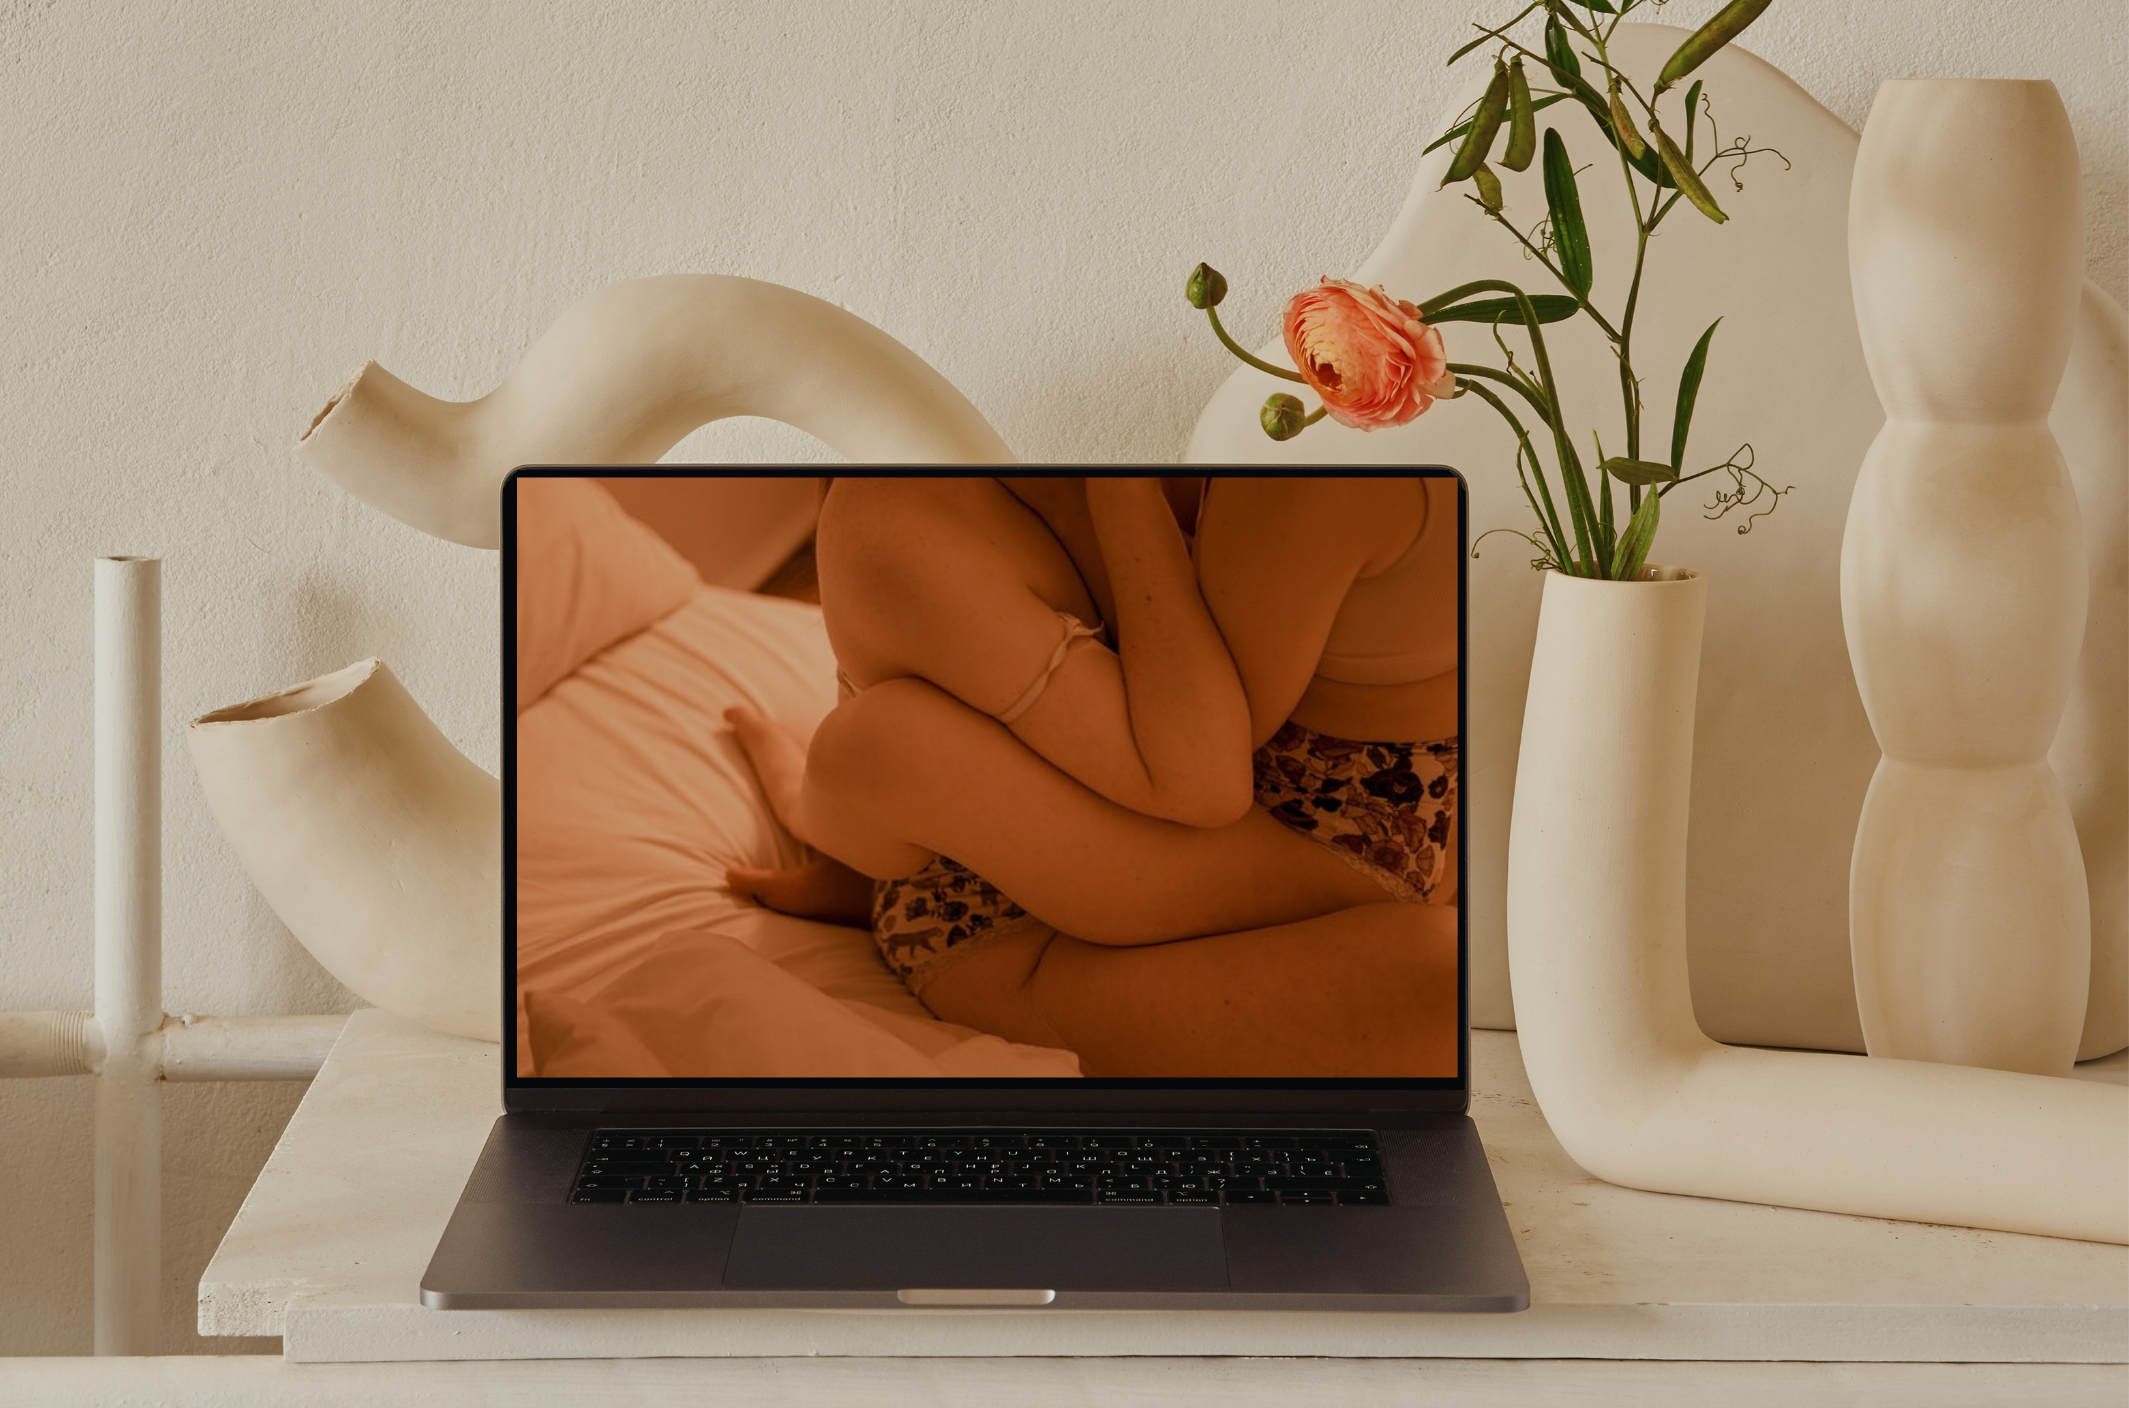 Is pornography bad for you? Plus, the questions to ask instead - Healthaid